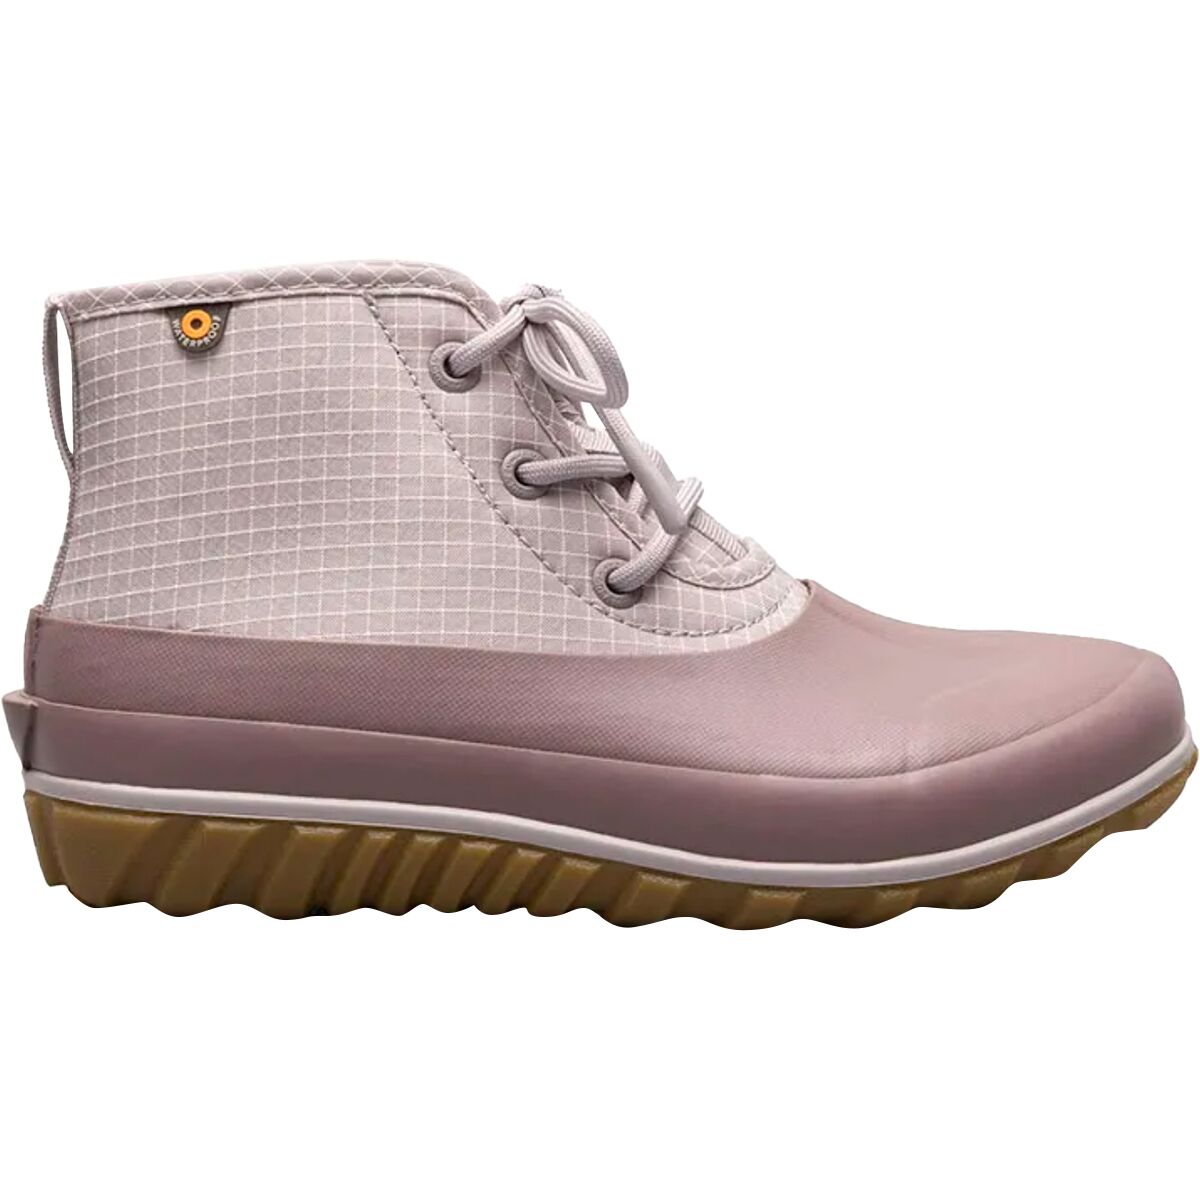 Bogs Classic Casual Check Boot - Women's